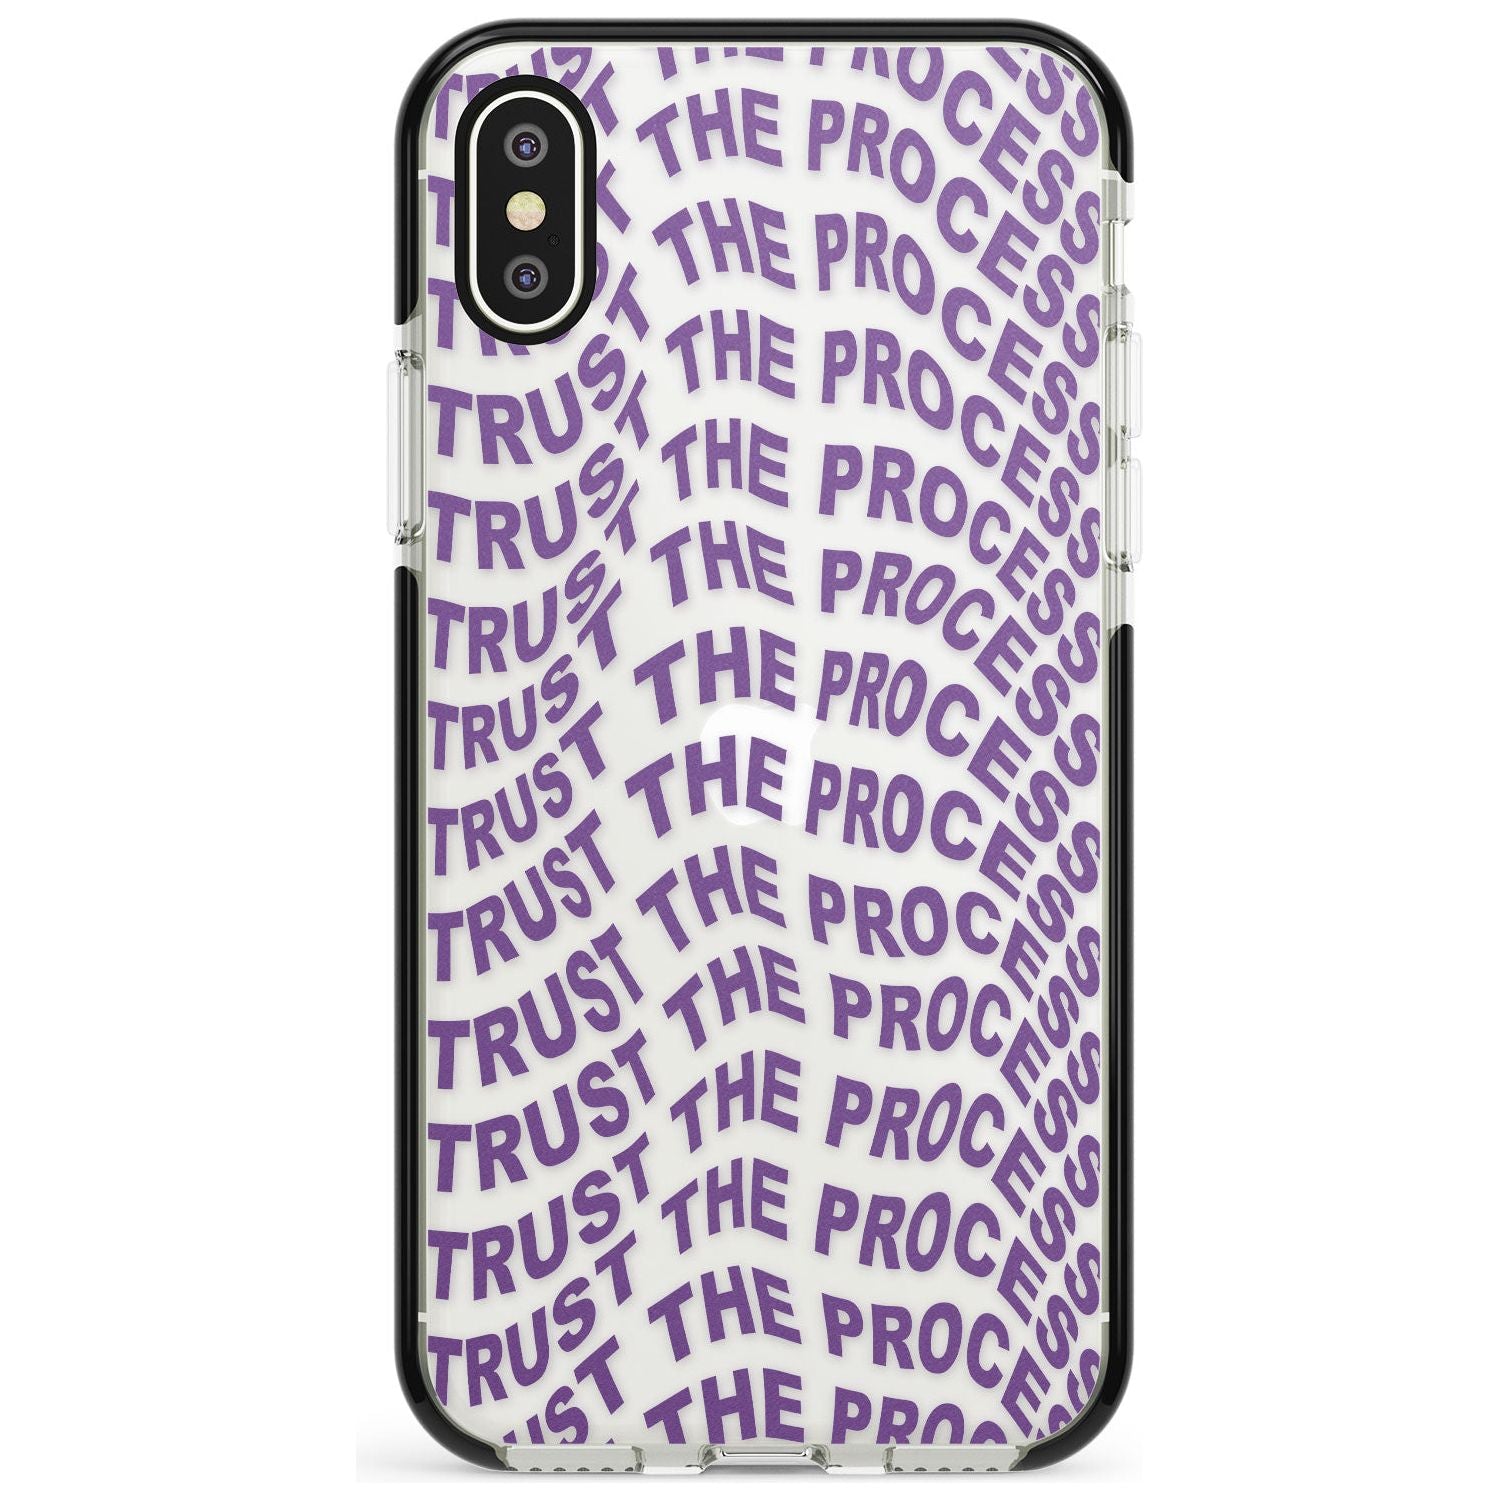 Trust The Process Black Impact Phone Case for iPhone X XS Max XR